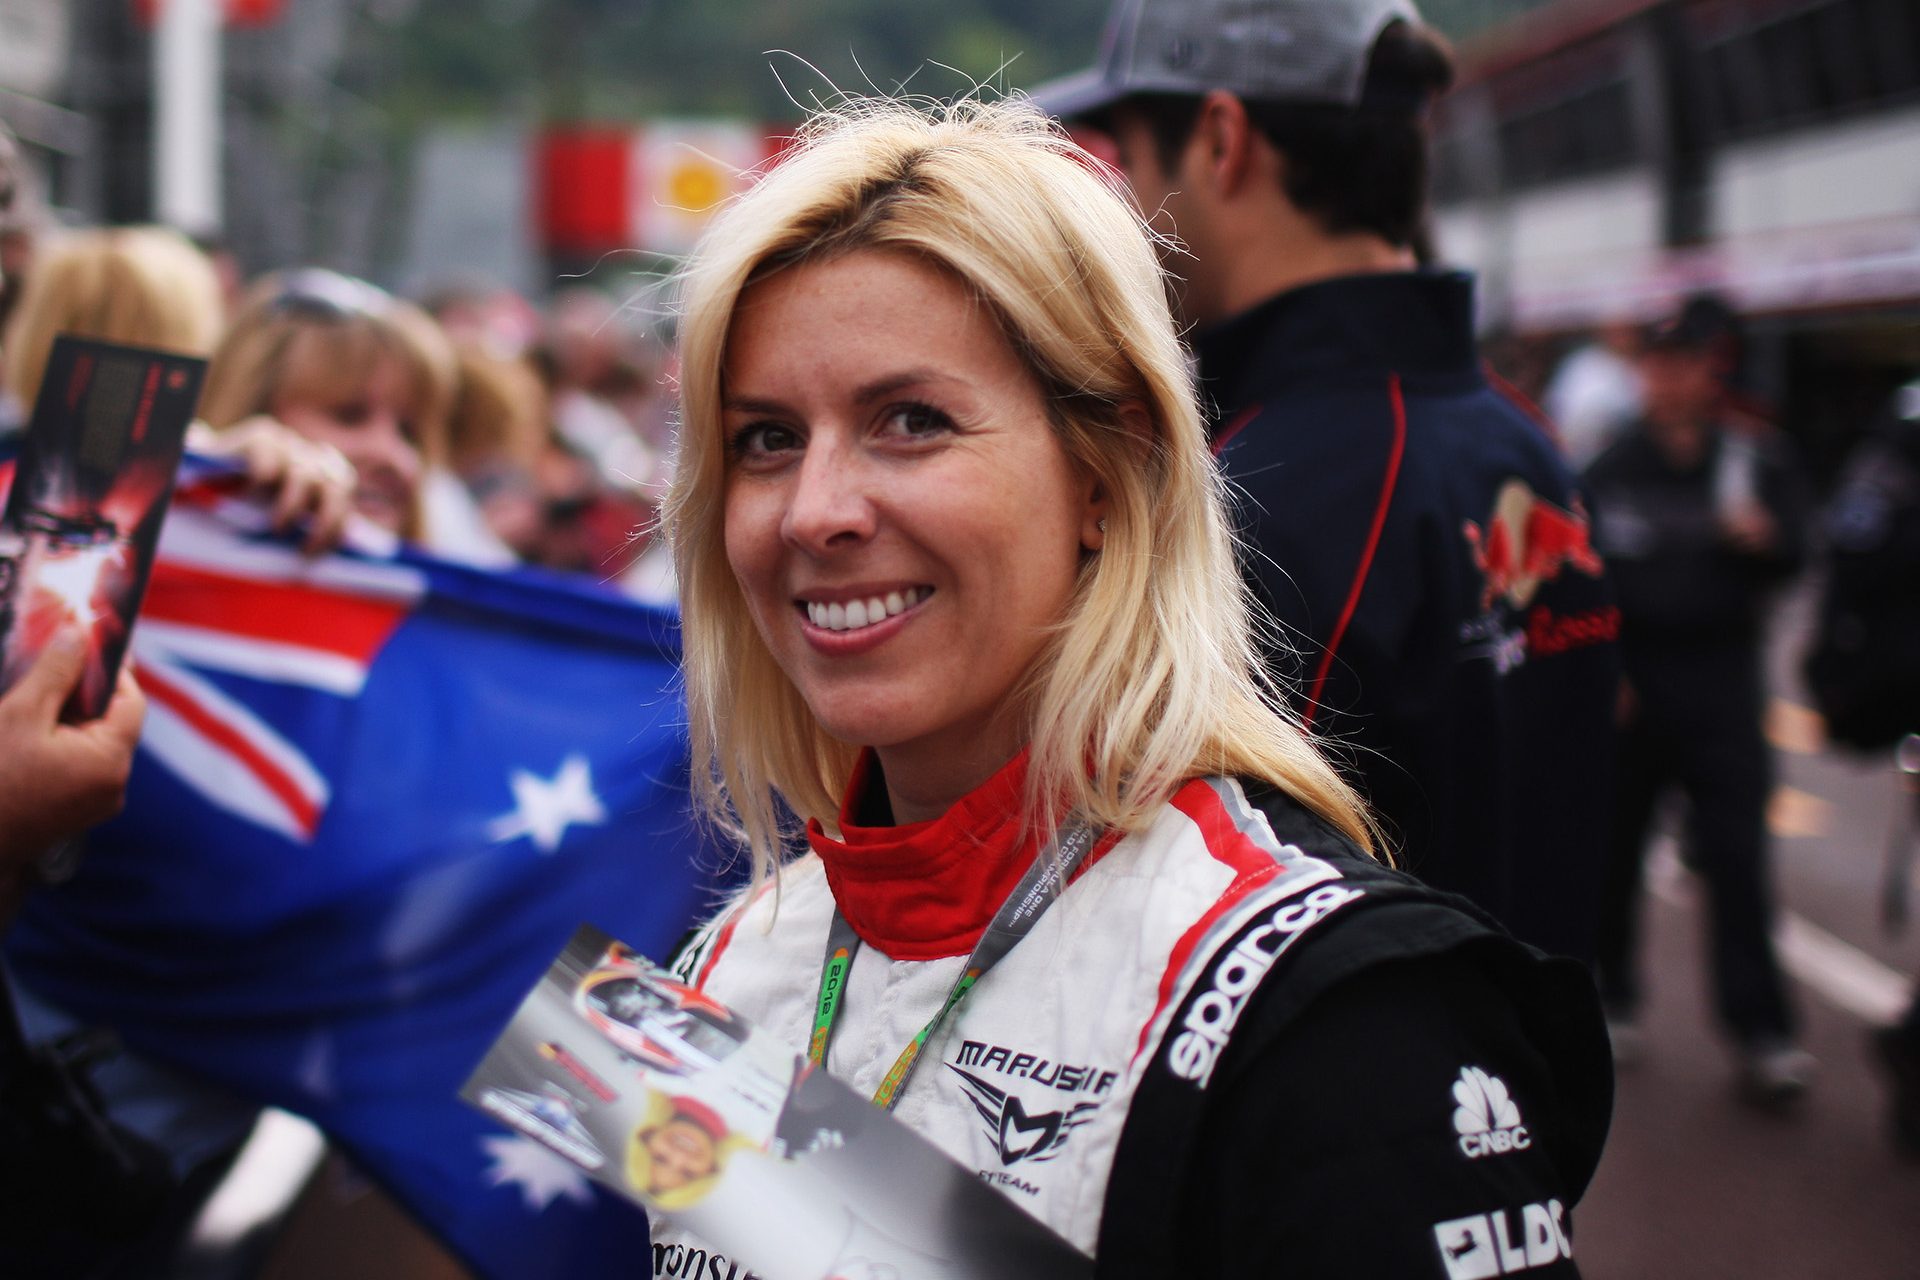 A woman with racing in her blood